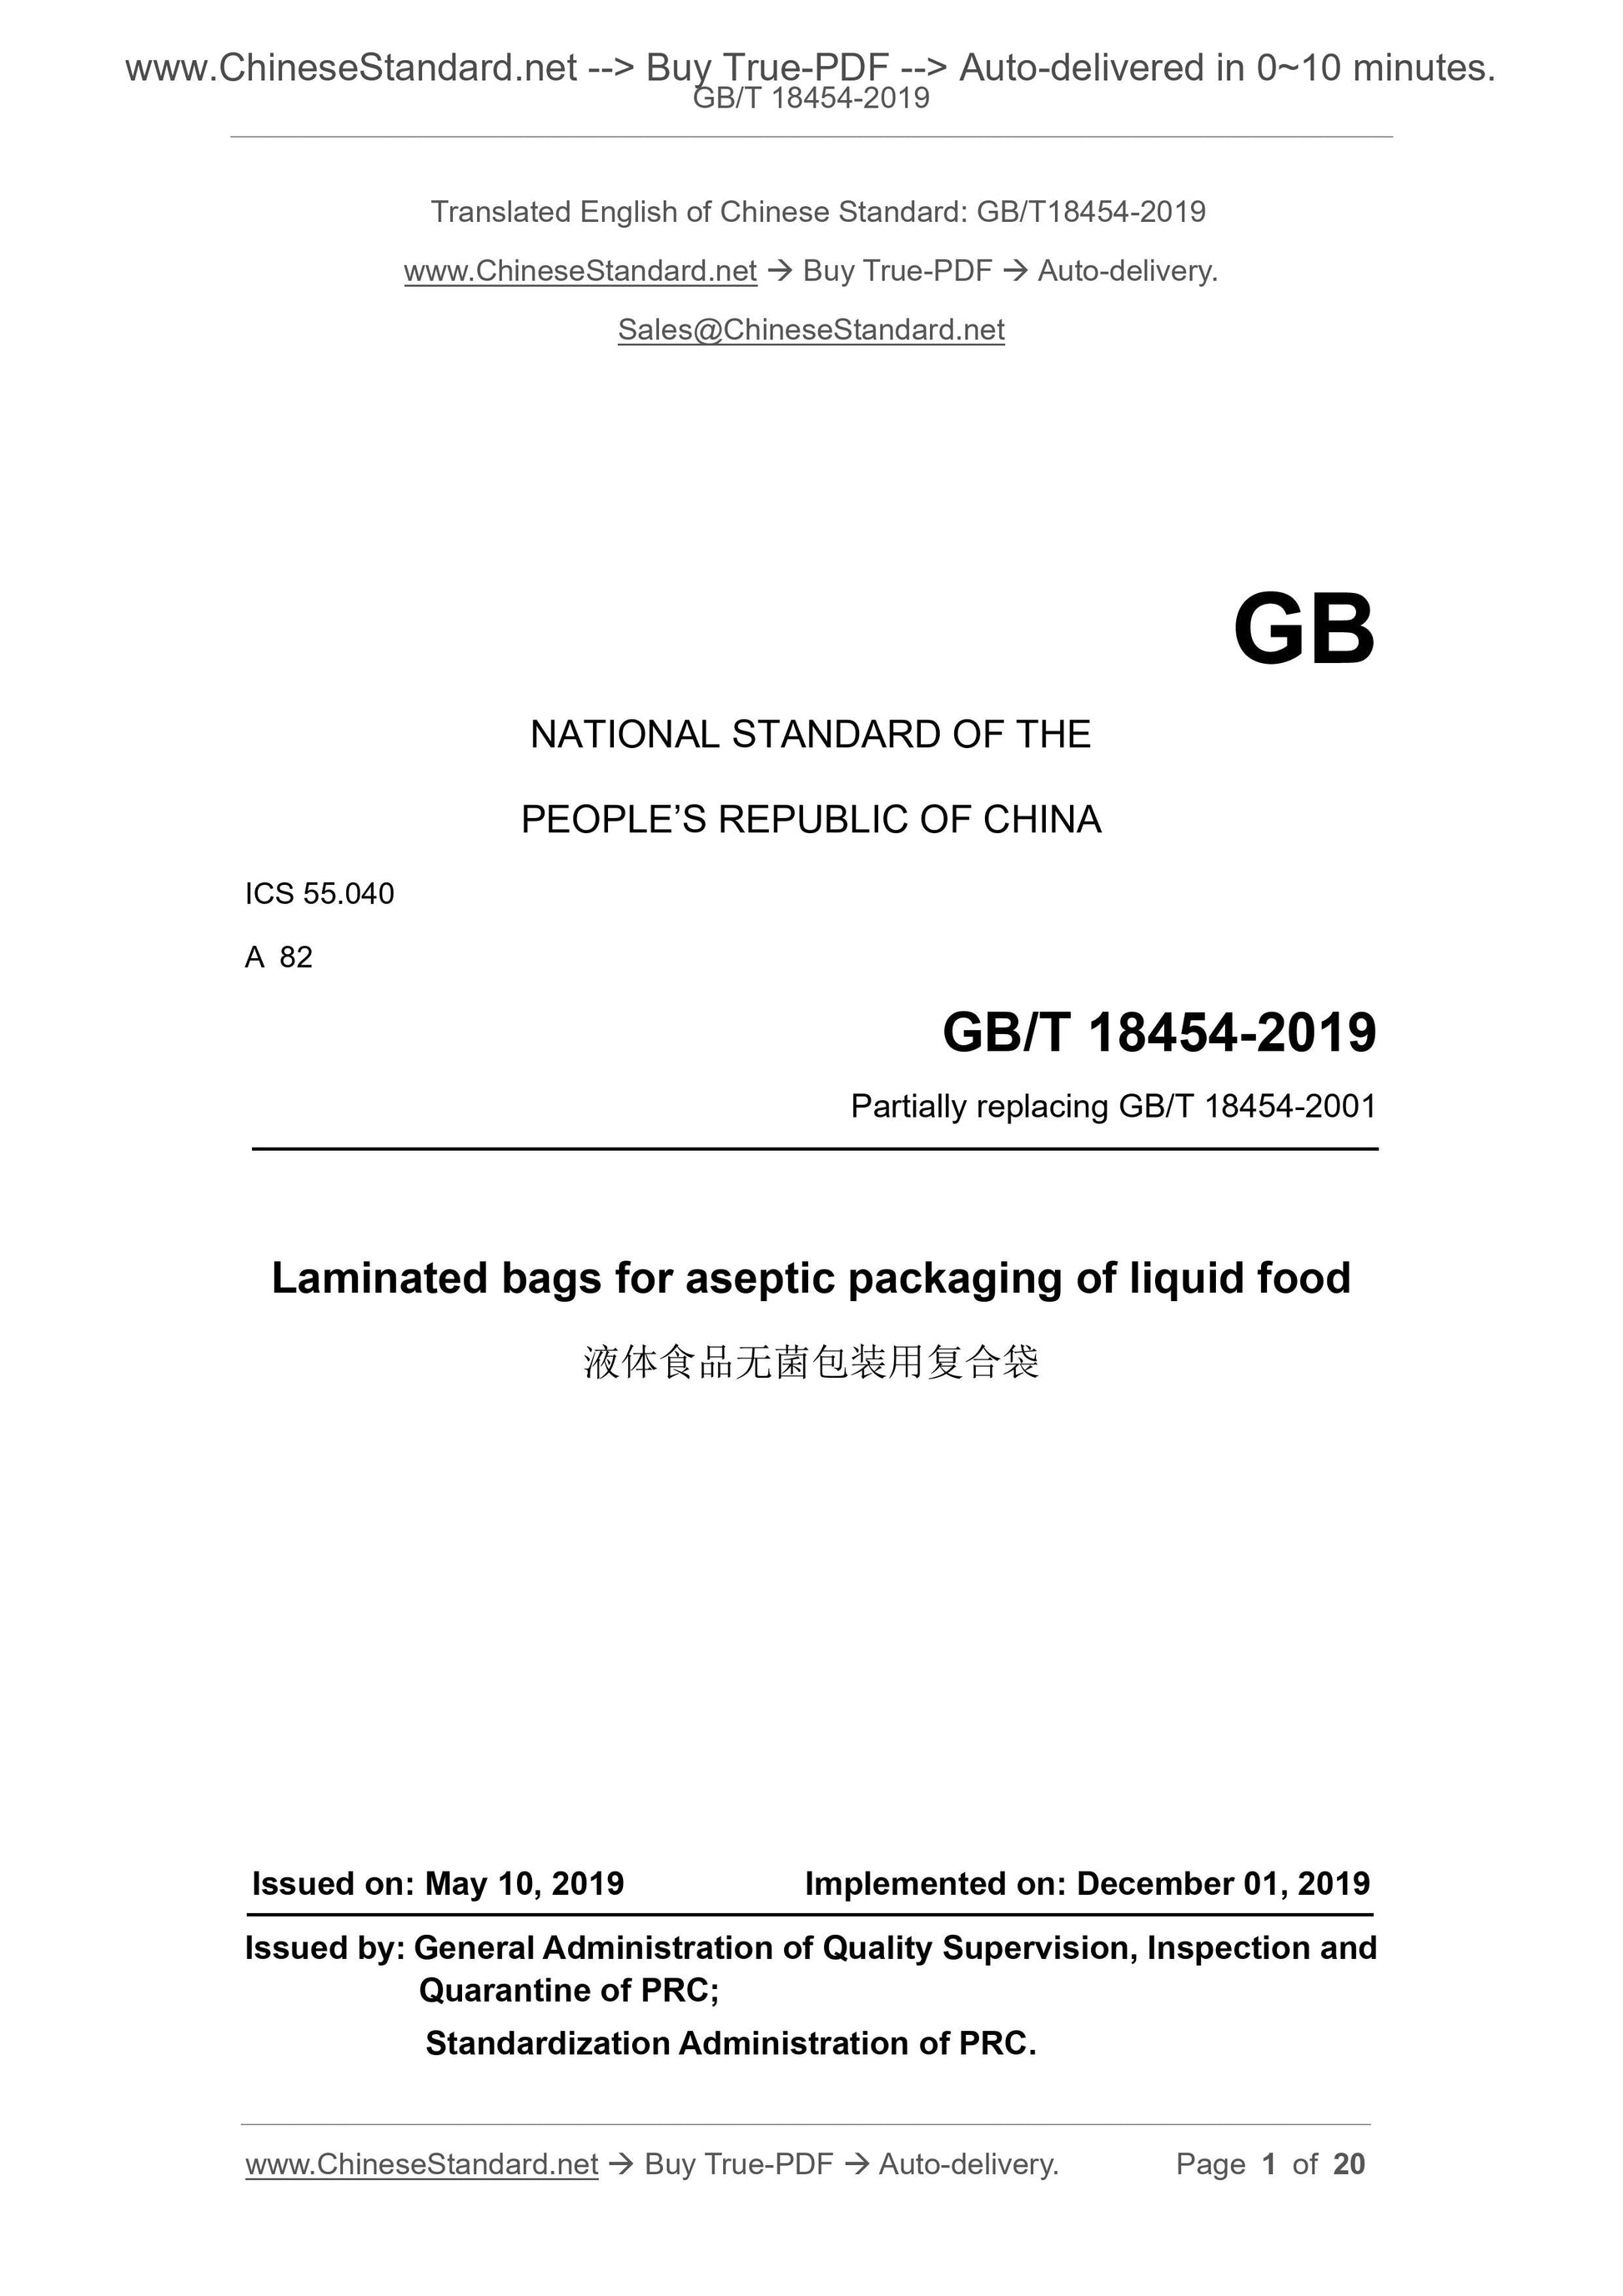 GB/T 18454-2019 Page 1